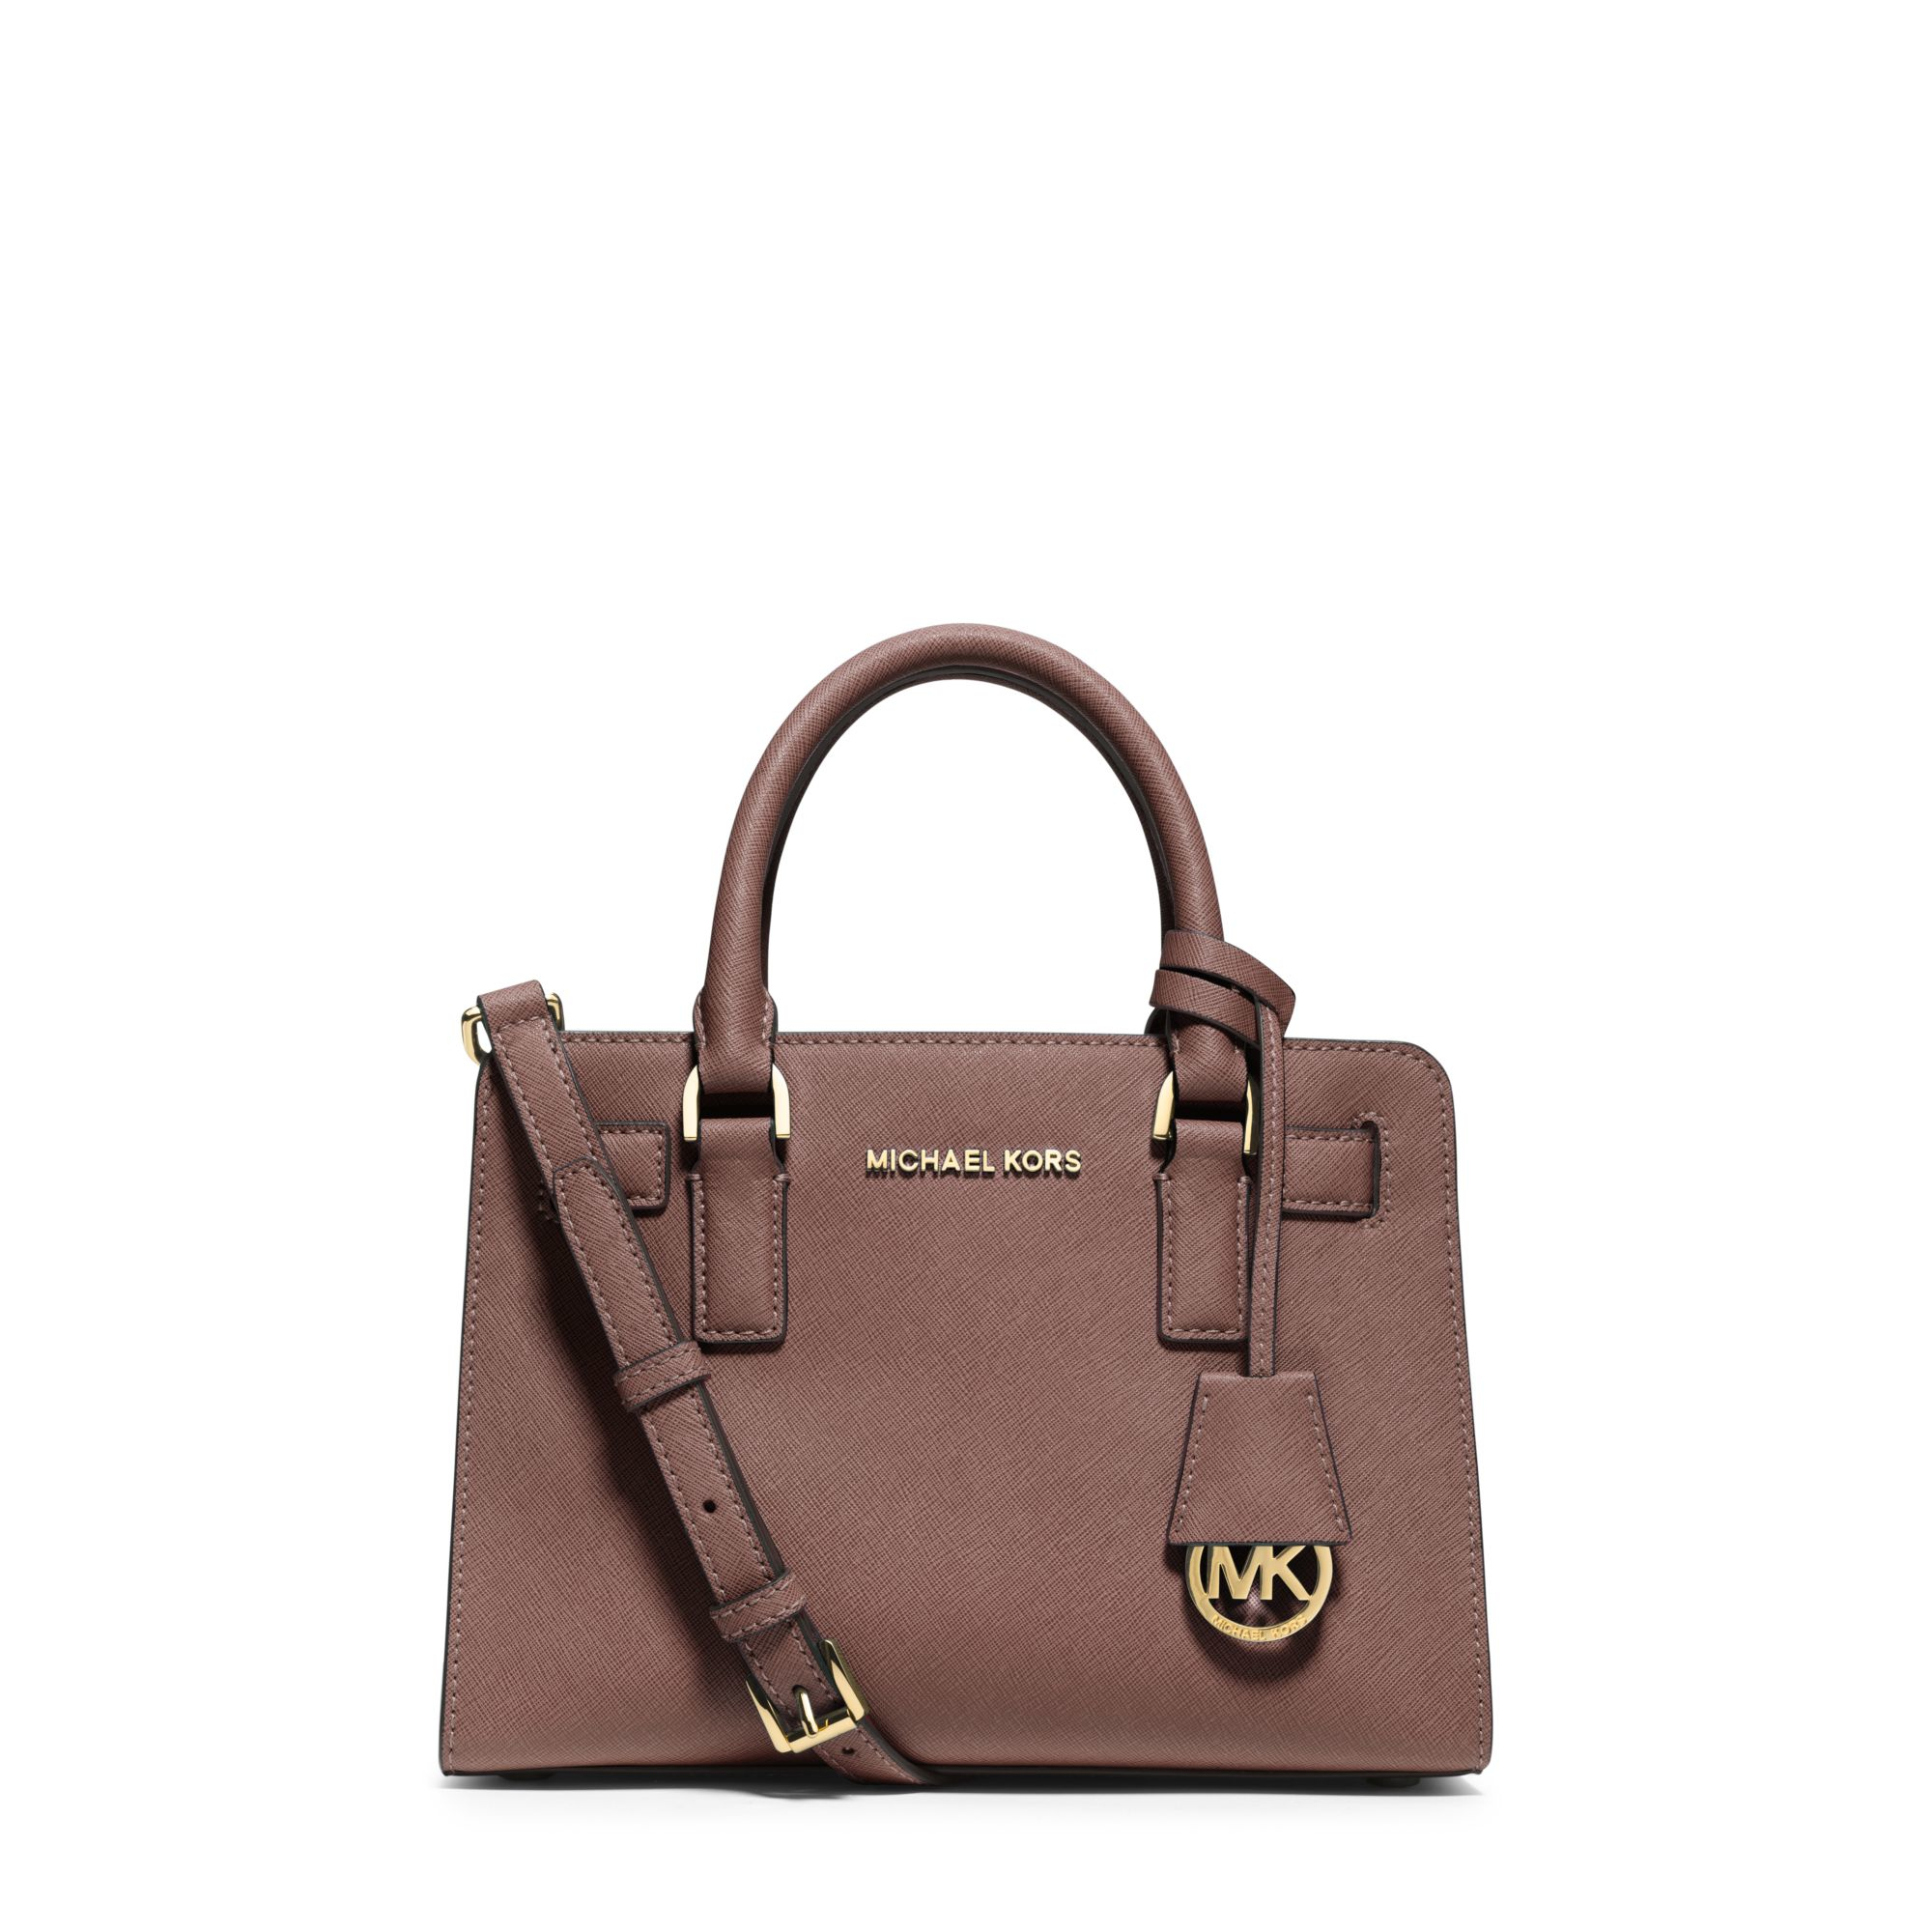 Lyst - Michael kors Dillon Small Saffiano-Leather Satchel in Brown